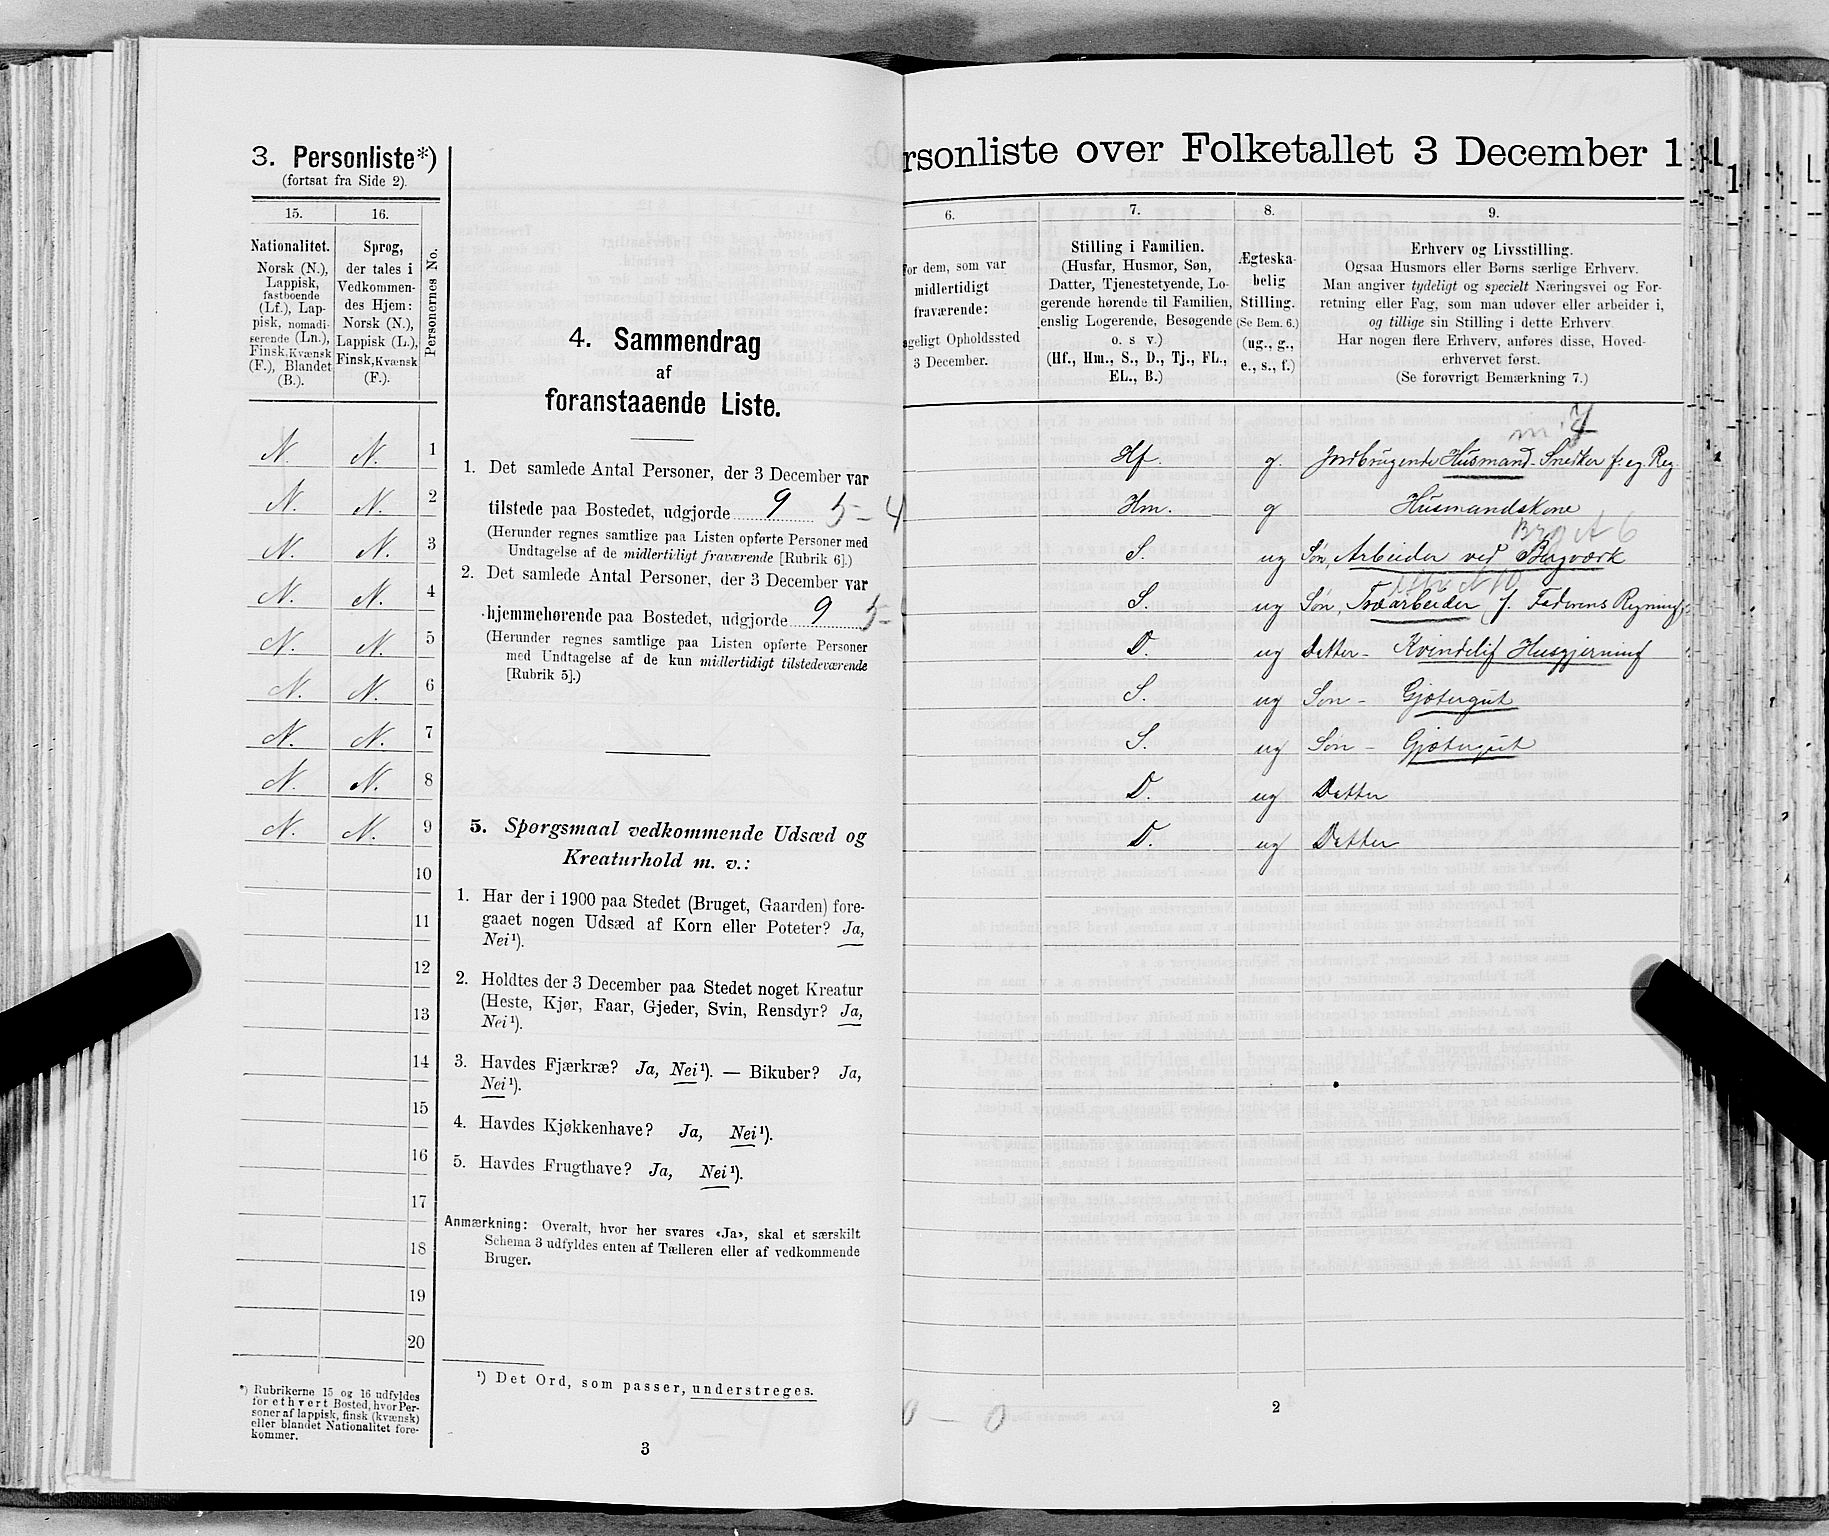 SAT, 1900 census for Mo, 1900, p. 184